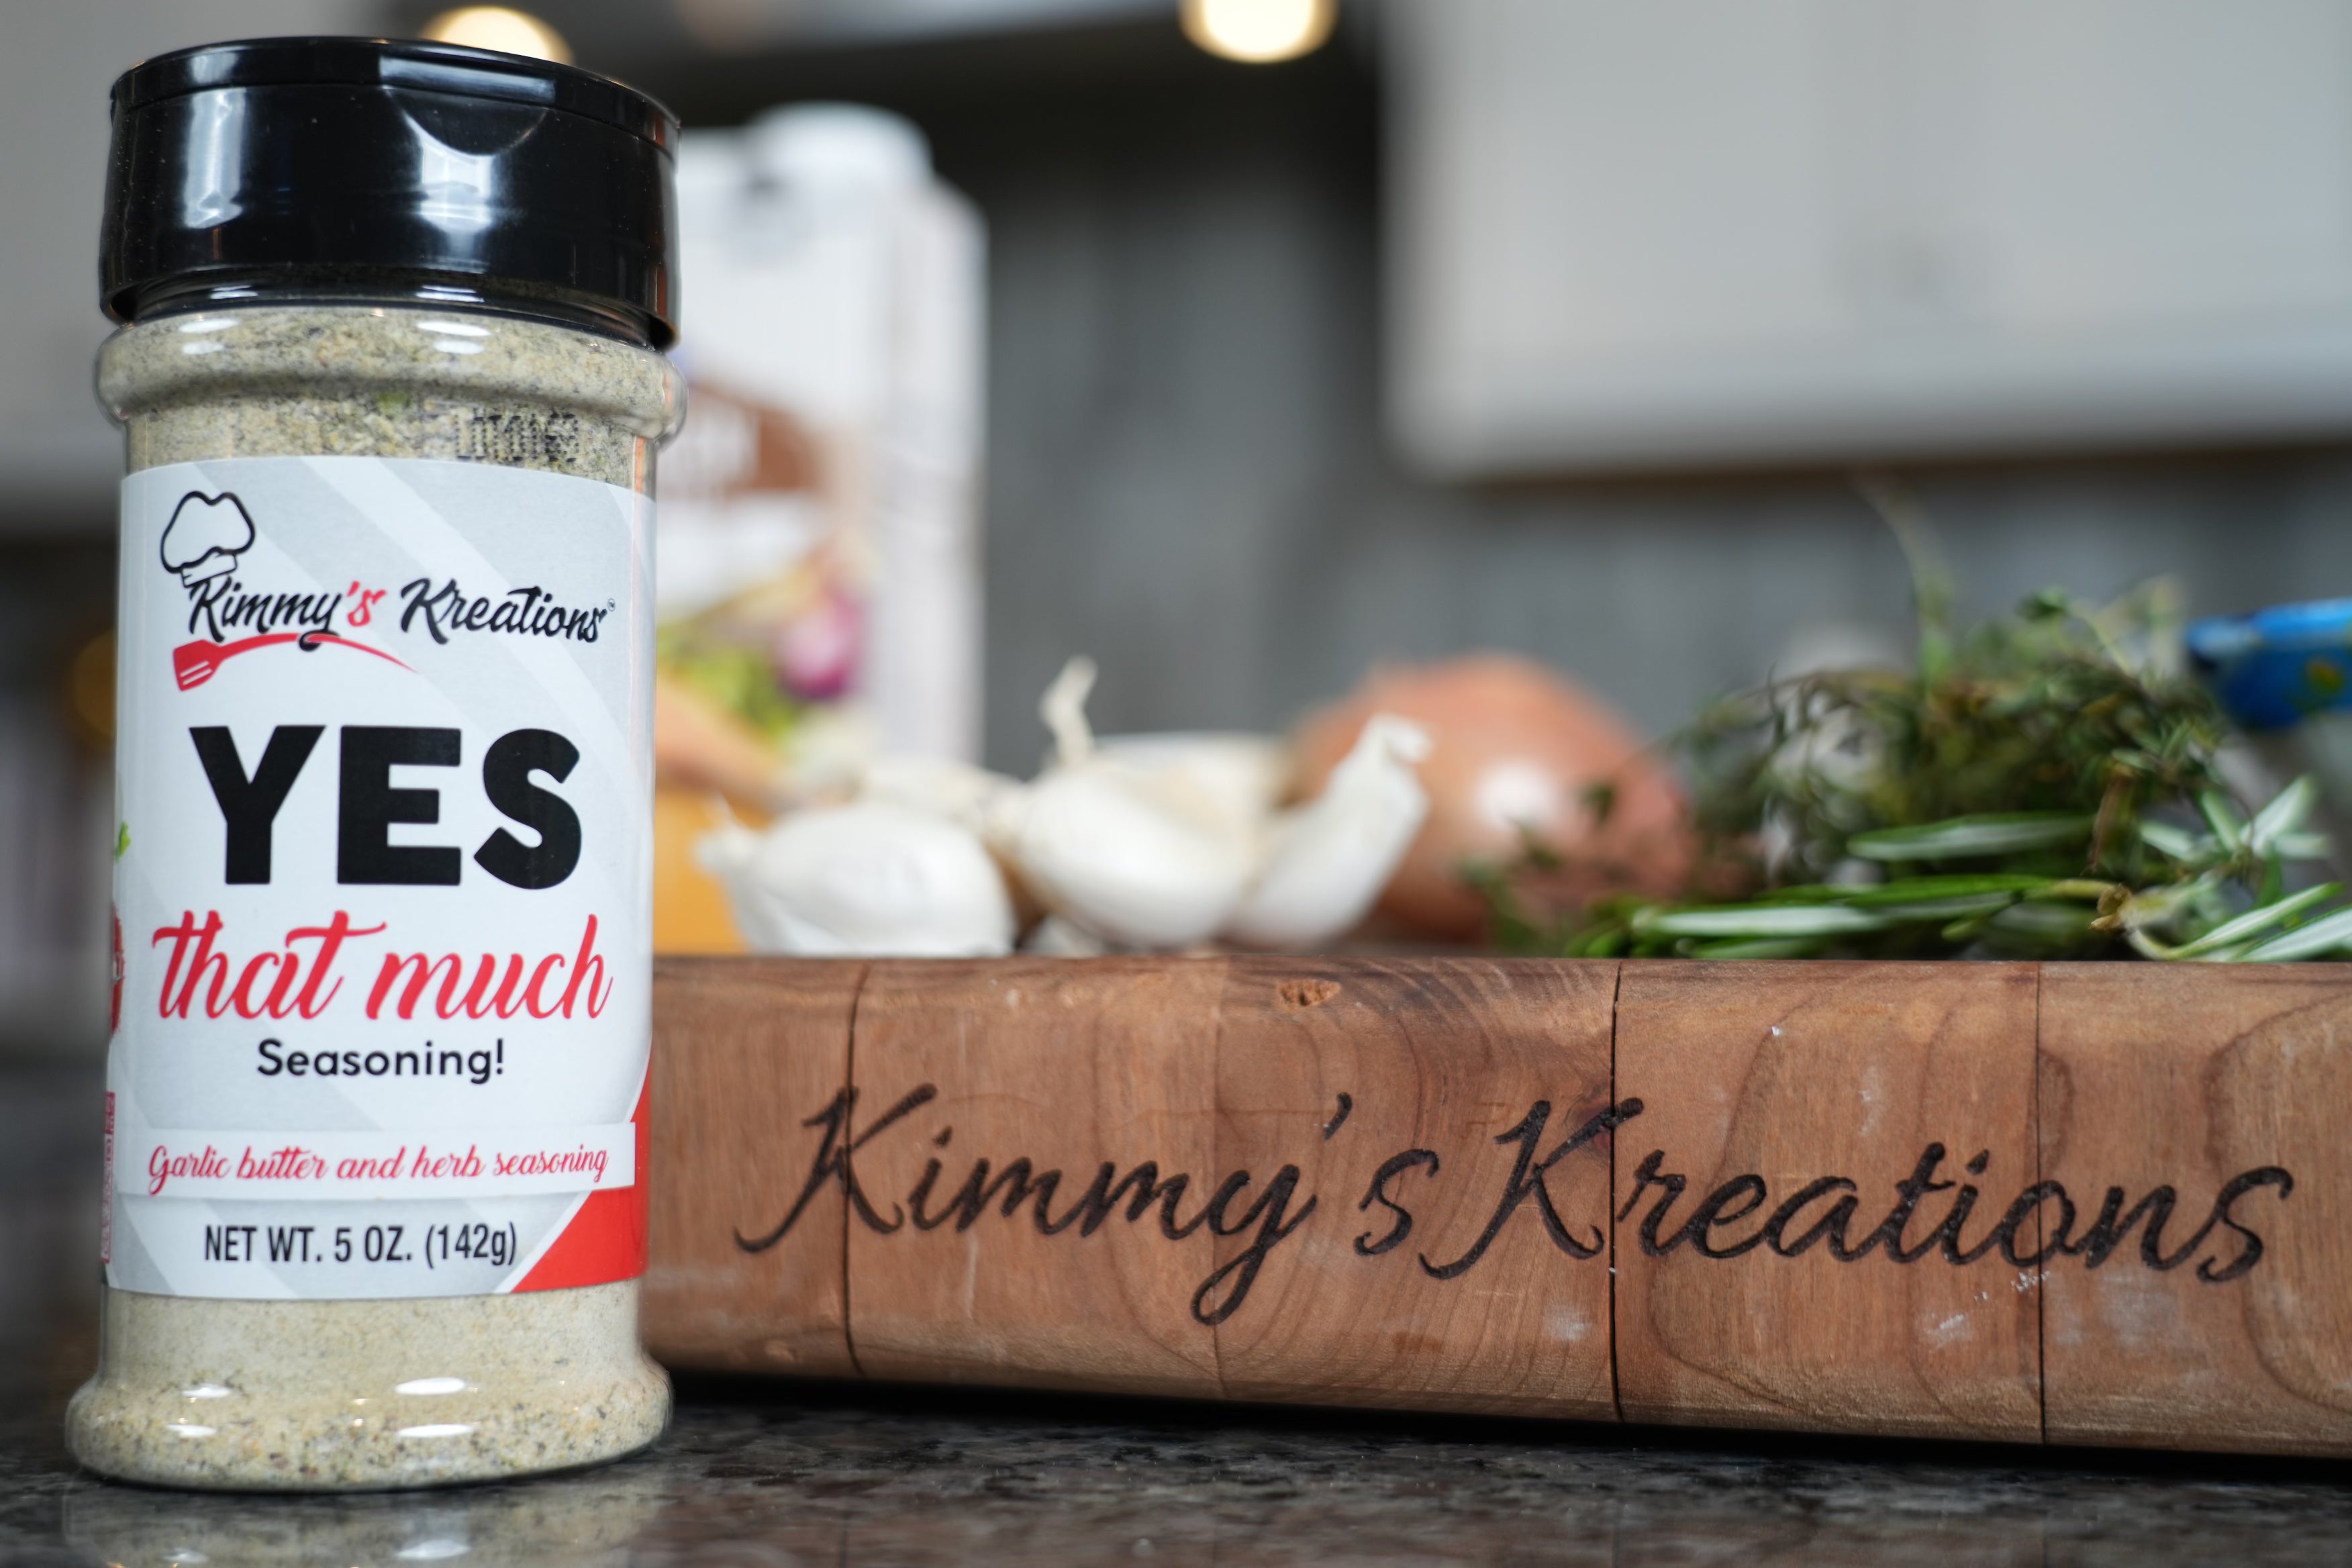  Kimmys Kreations Yes That Much Seasoning